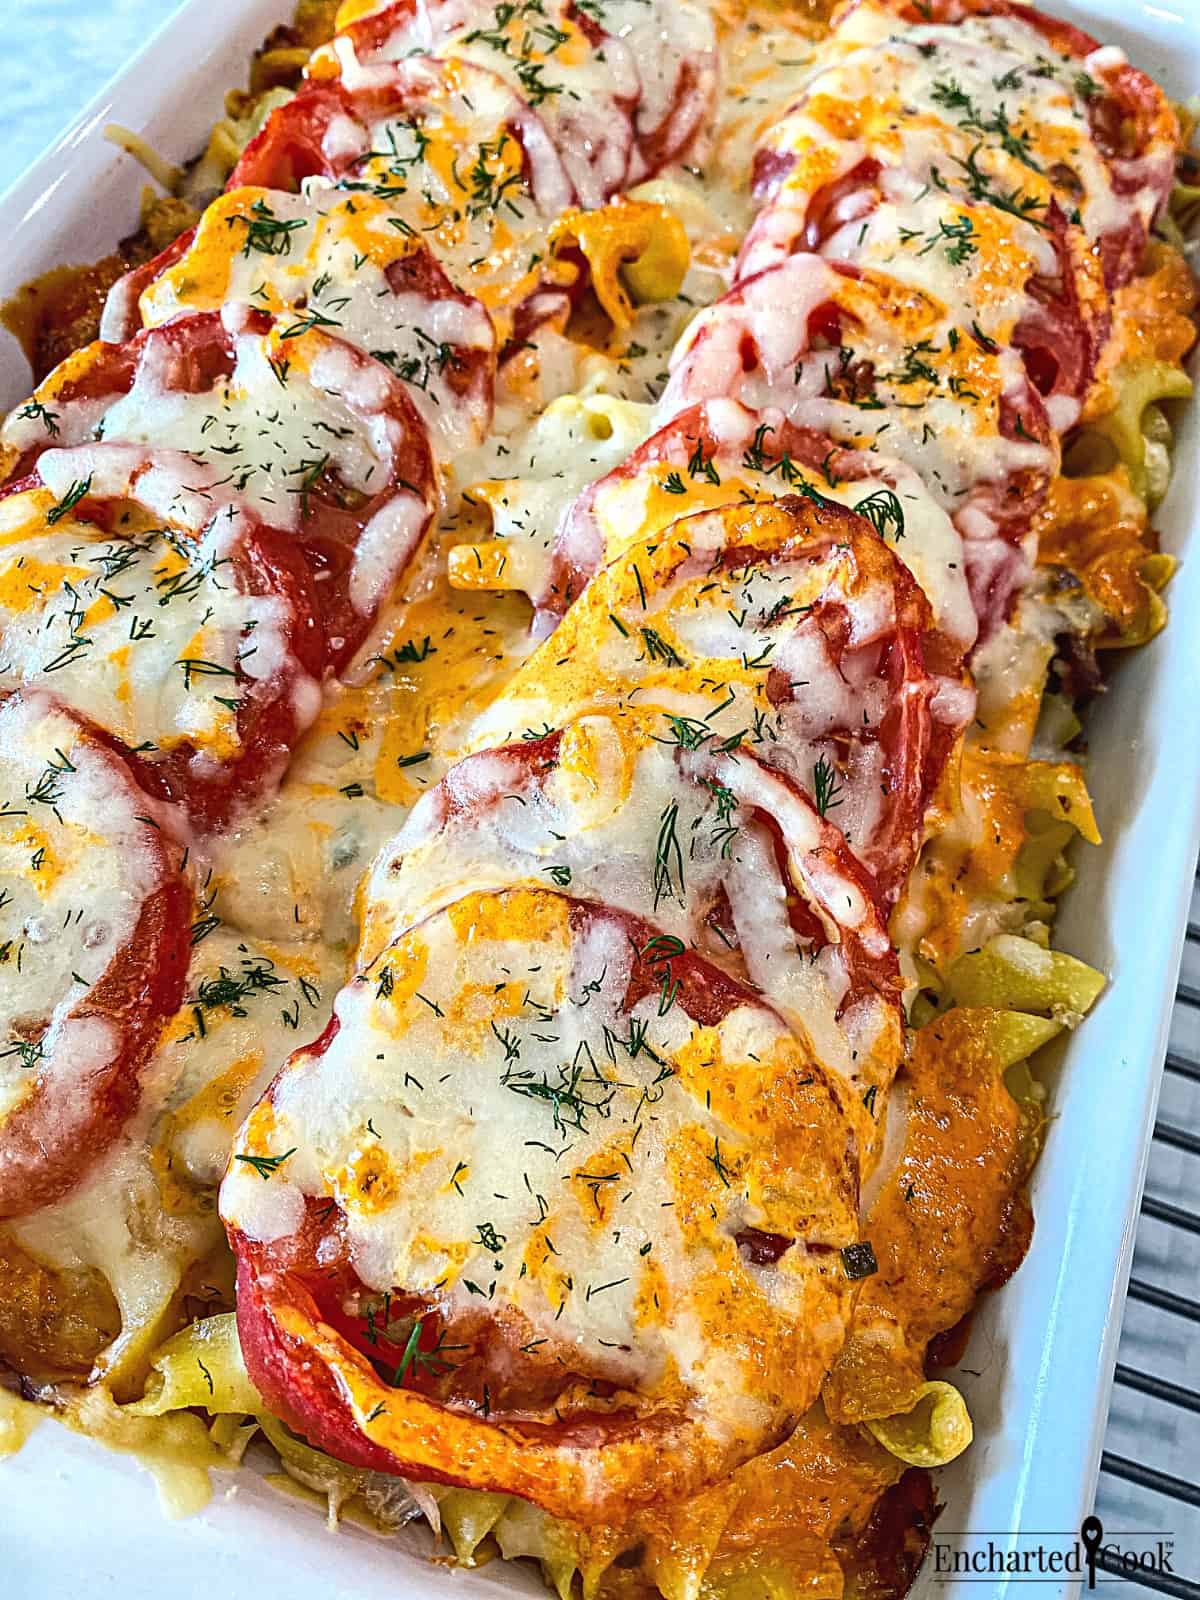 Reuben casserole topped with tomato, cheese, and thousand island dressing fresh from the oven.